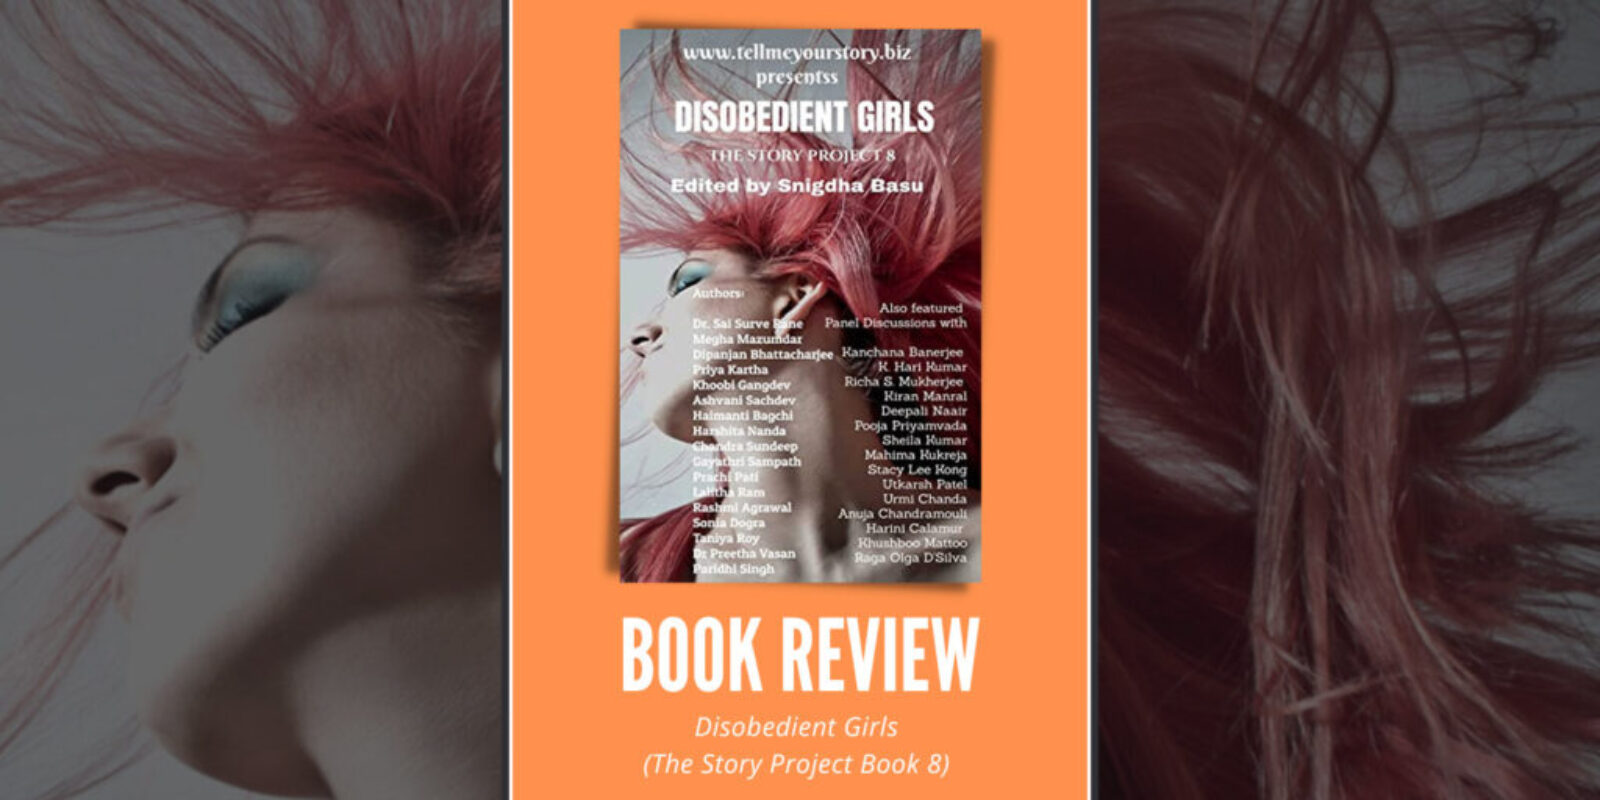 Disobedient-Girls-The-Story-Project-Book-8-Book-Review-Header